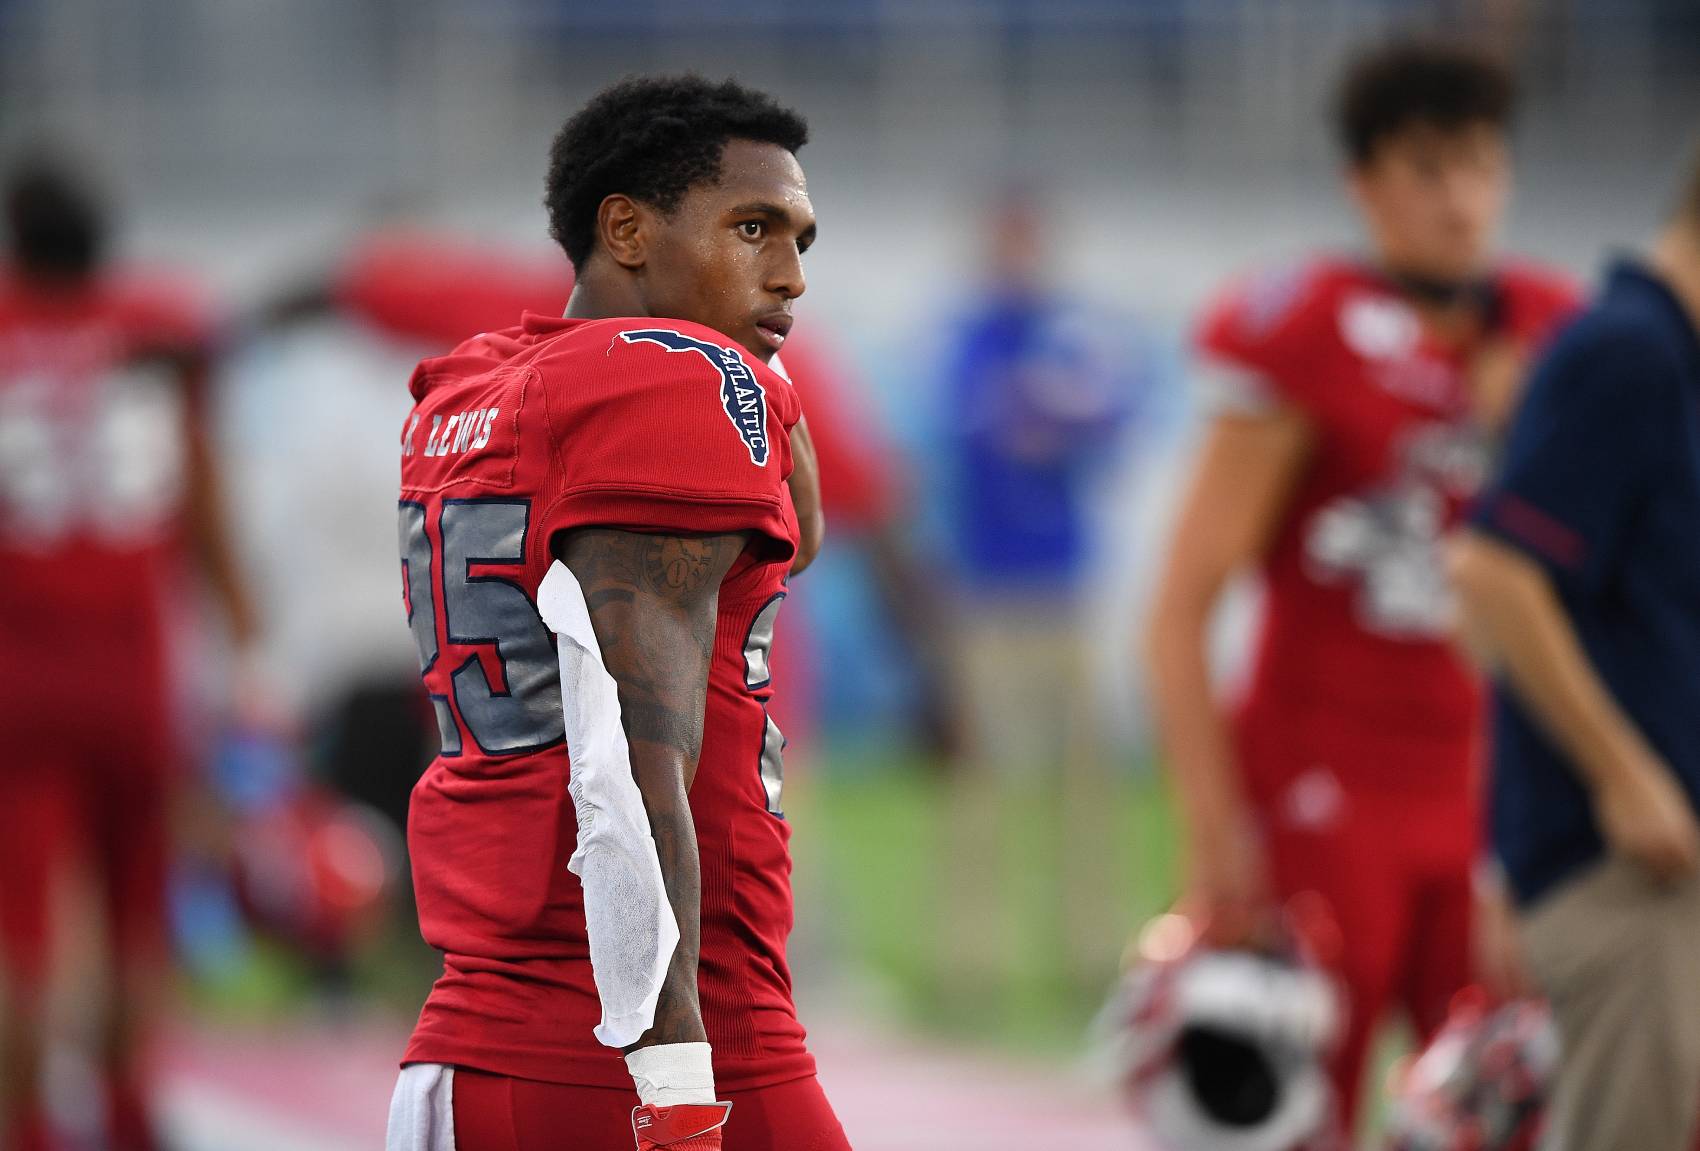 Rahsaan Lewis, the son of NFL legend Ray Lewis, could be headed to his third school in three years. Lewis played at Florida Atlantic last season. 